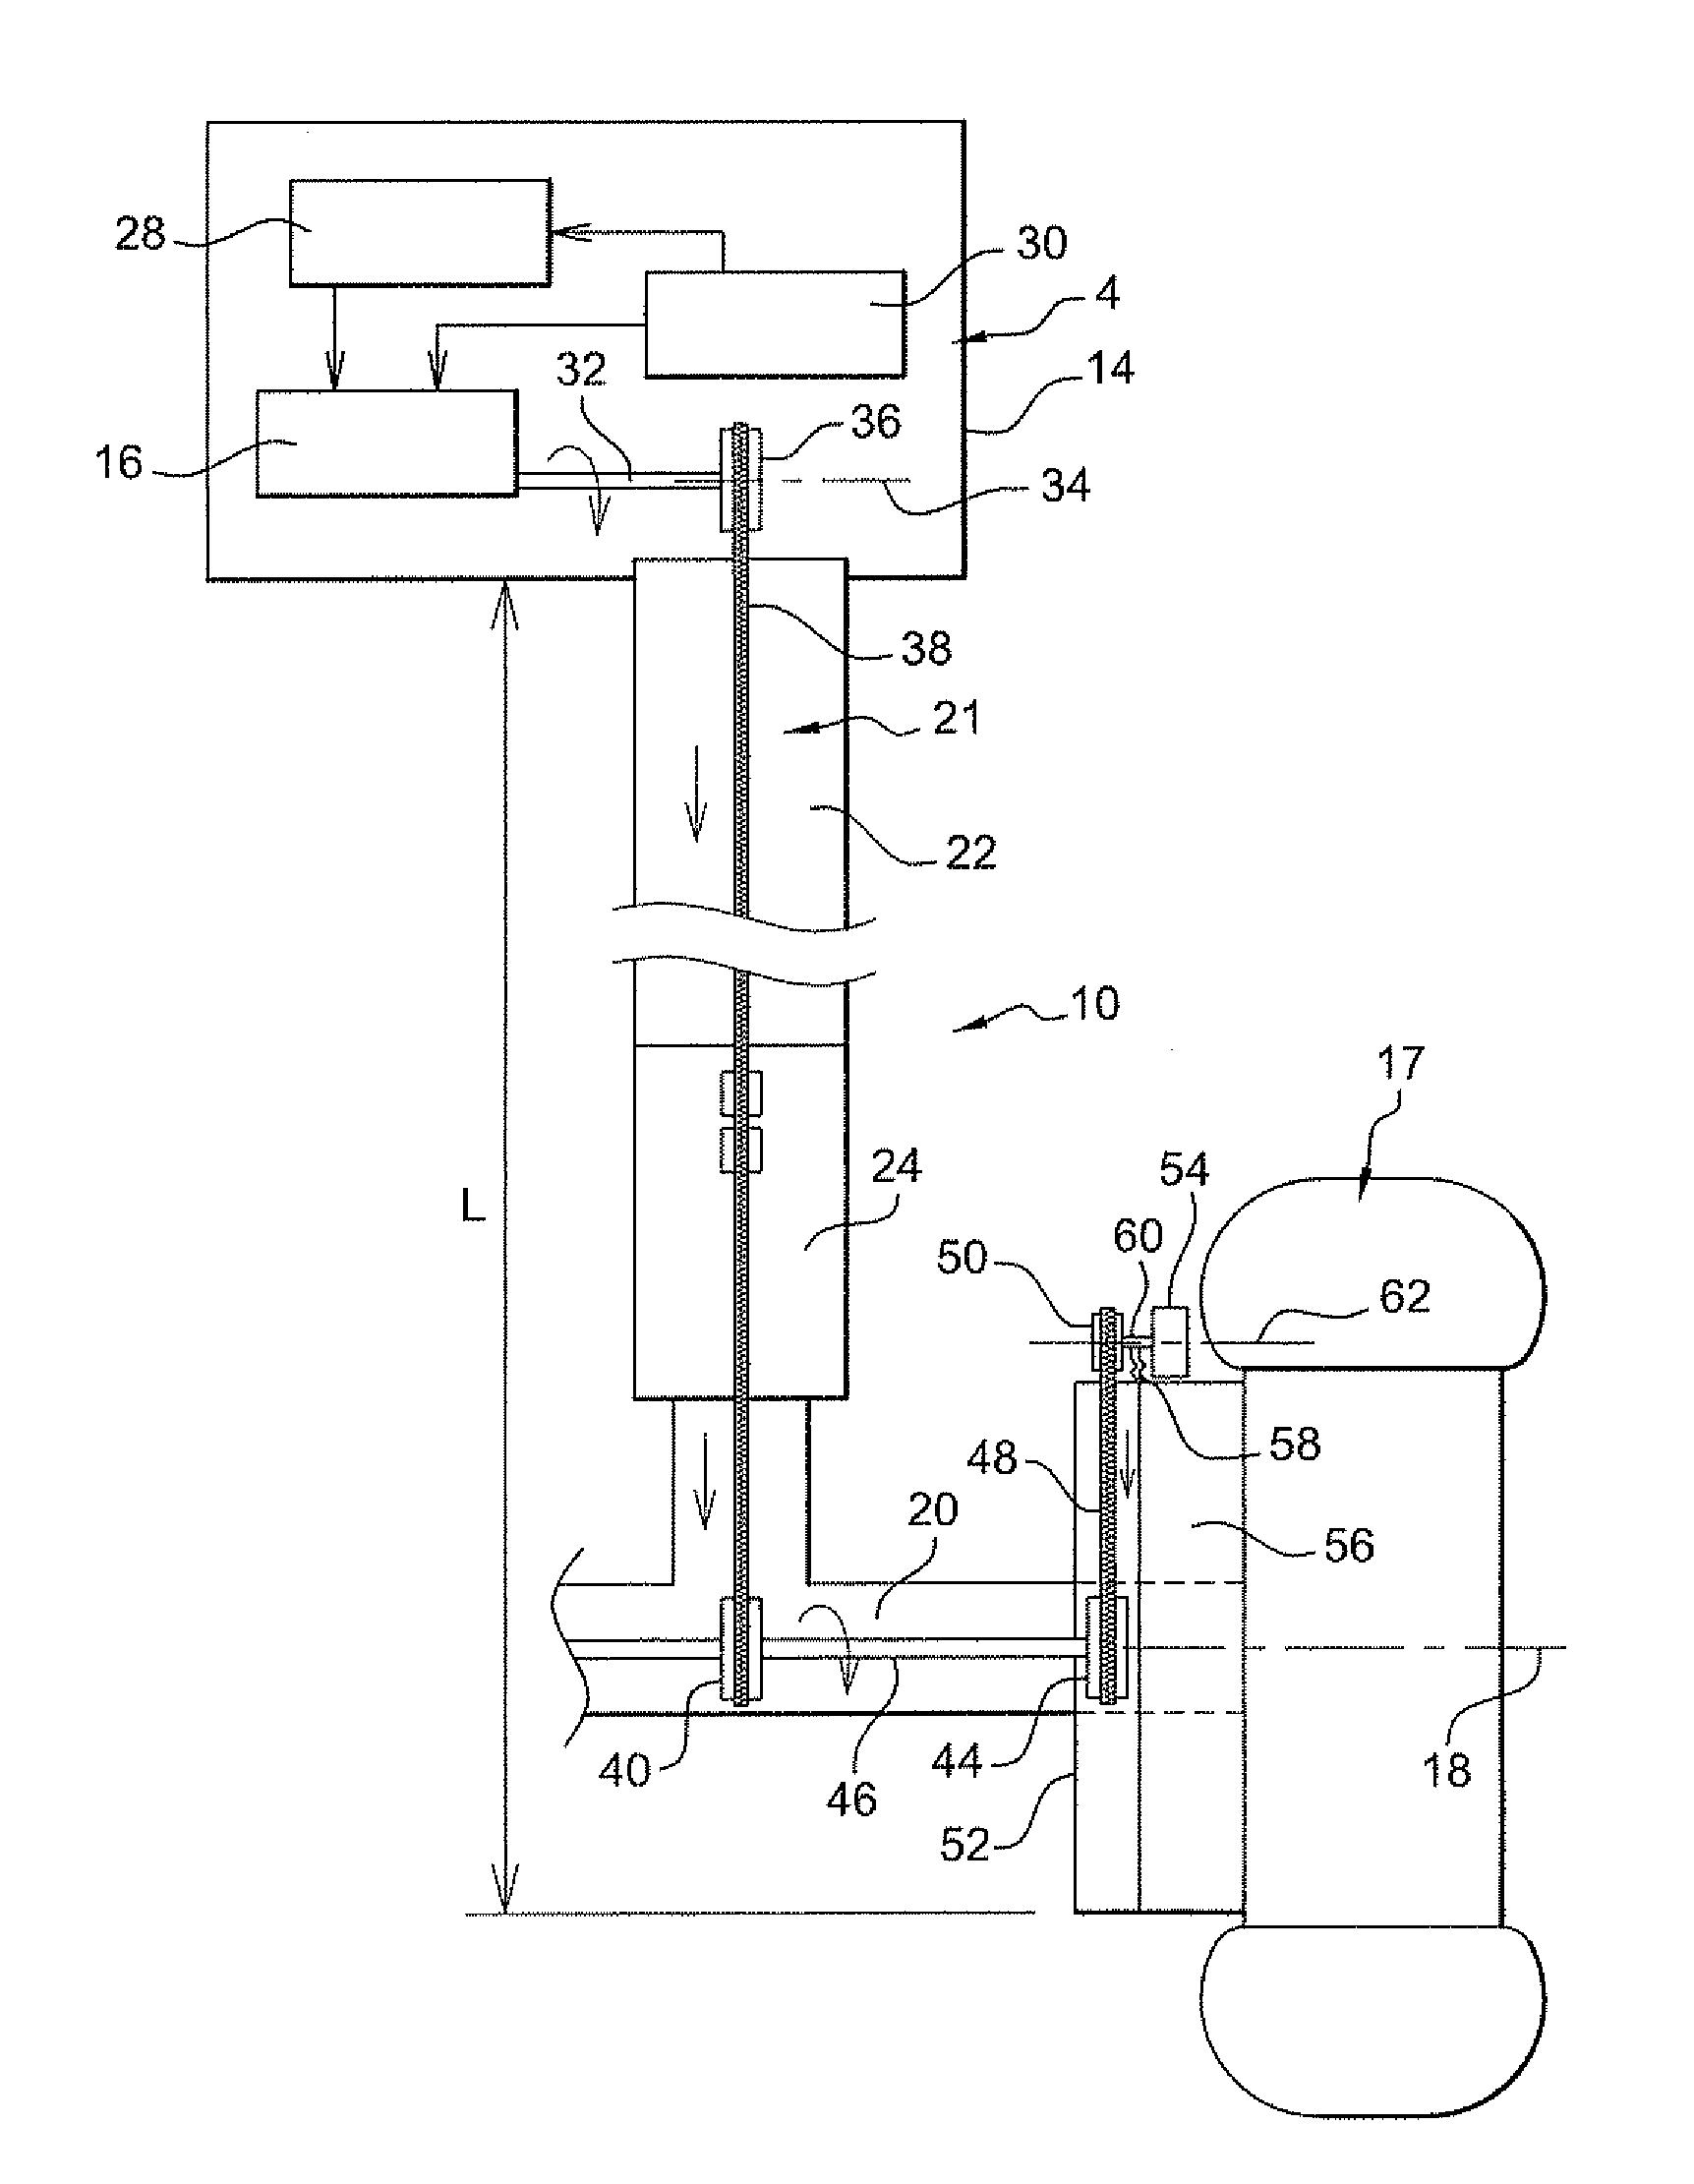 Aircraft undercarriage with motorization and transmission